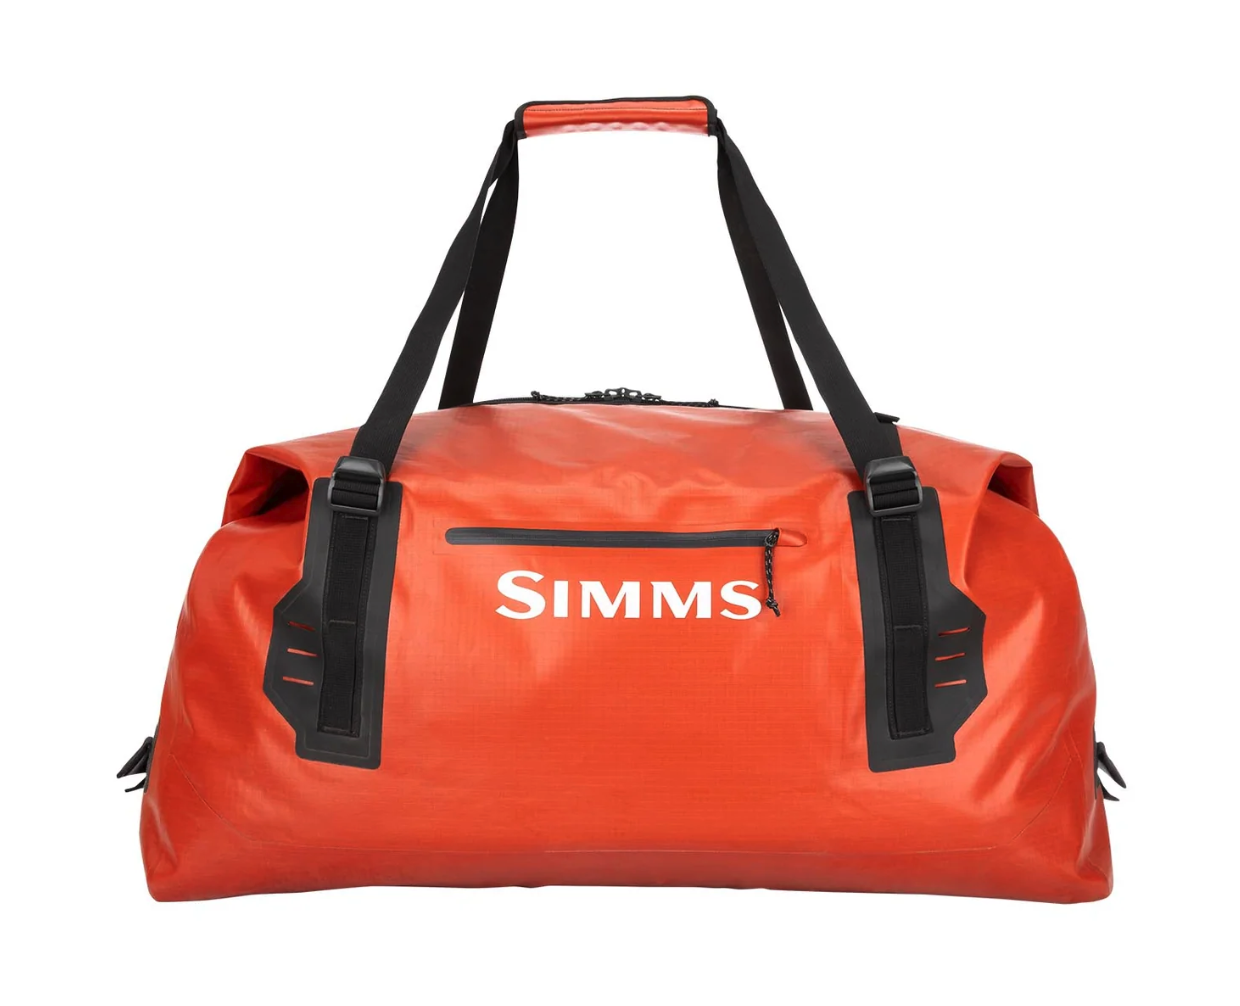 Simms Fly Fishing Bags & Luggage For Sale